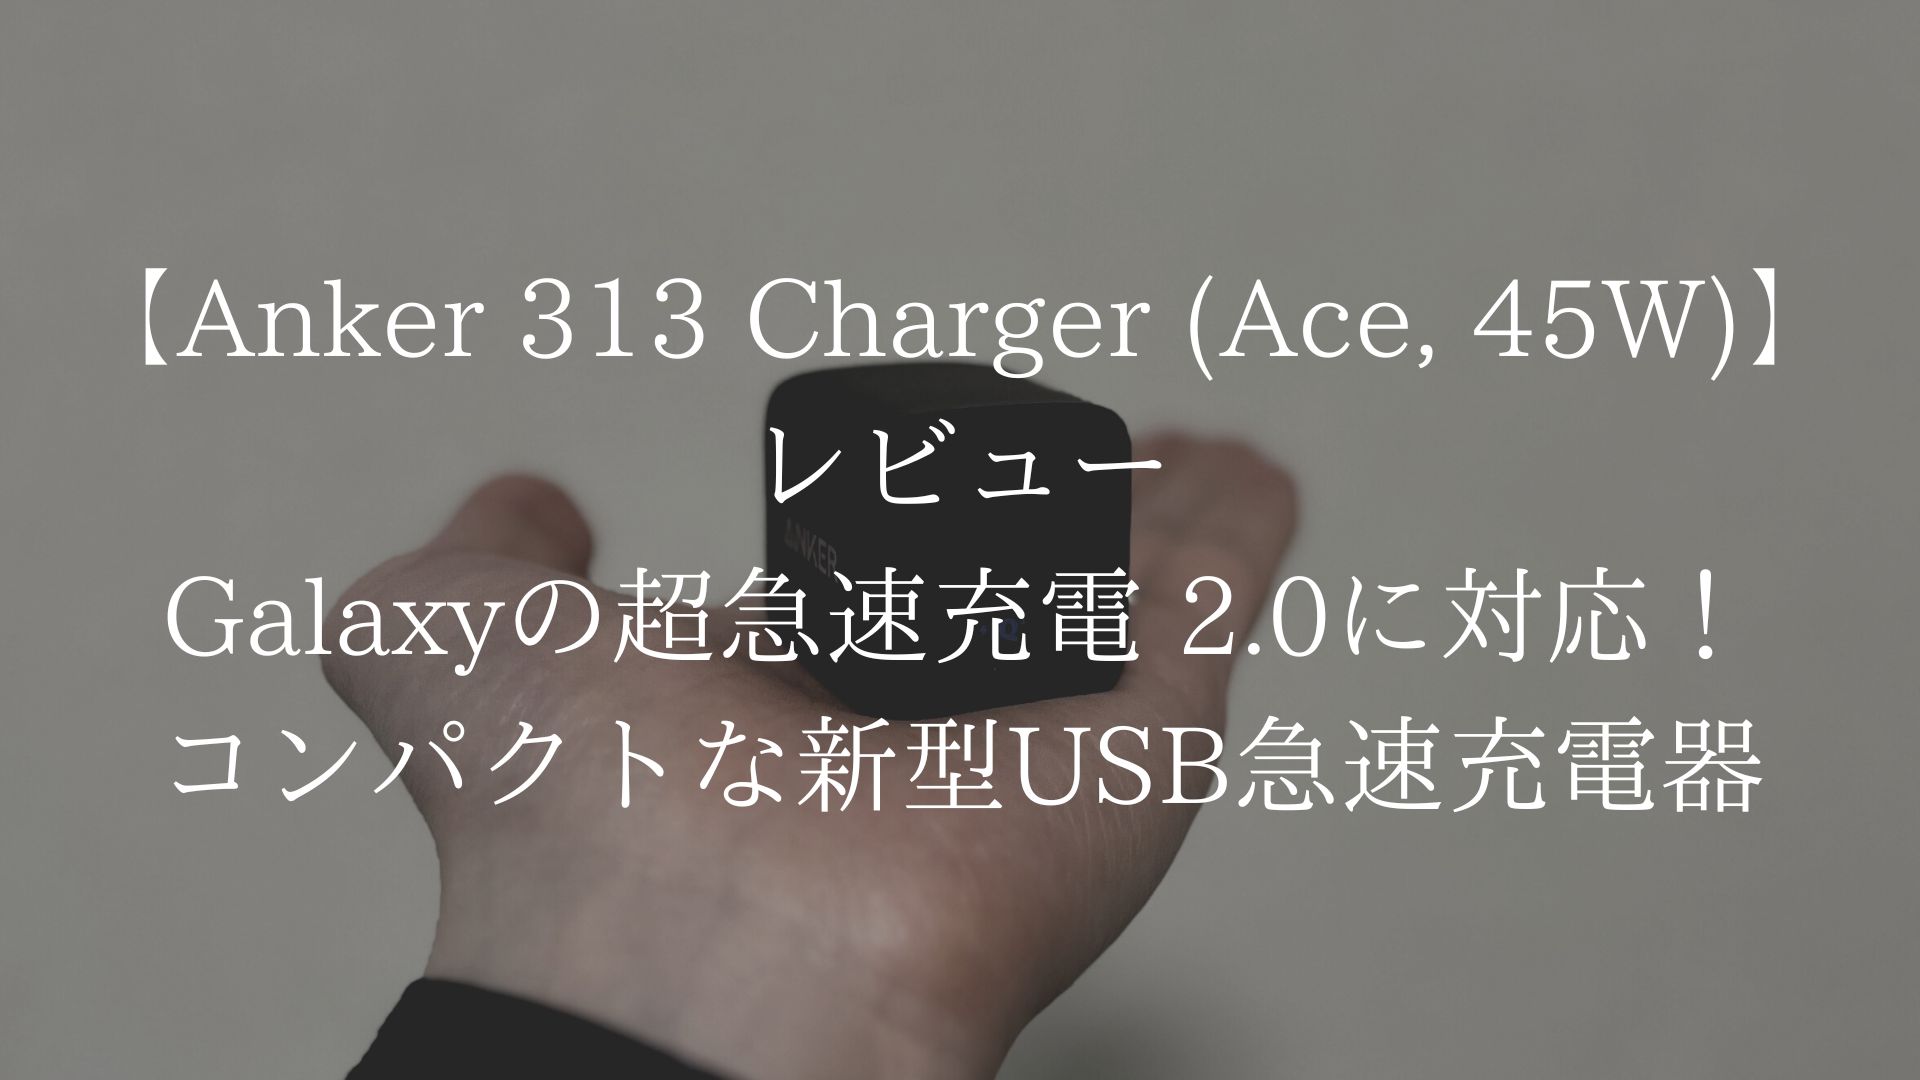 Anker 313 Charger (Ace, 45W)のアイキャッチ画像